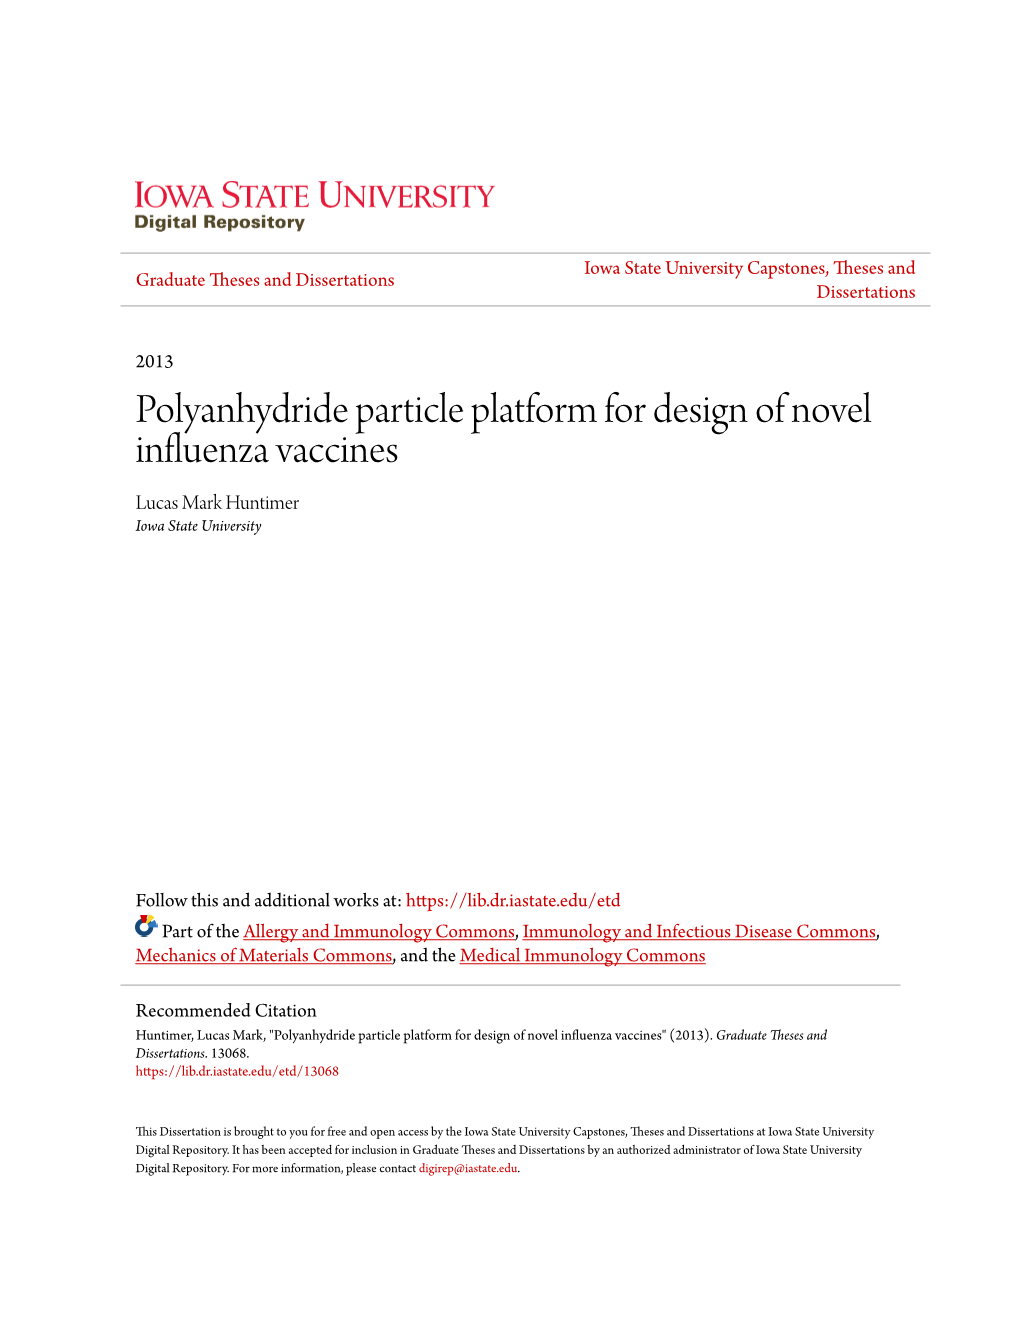 Polyanhydride Particle Platform for Design of Novel Influenza Vaccines Lucas Mark Huntimer Iowa State University